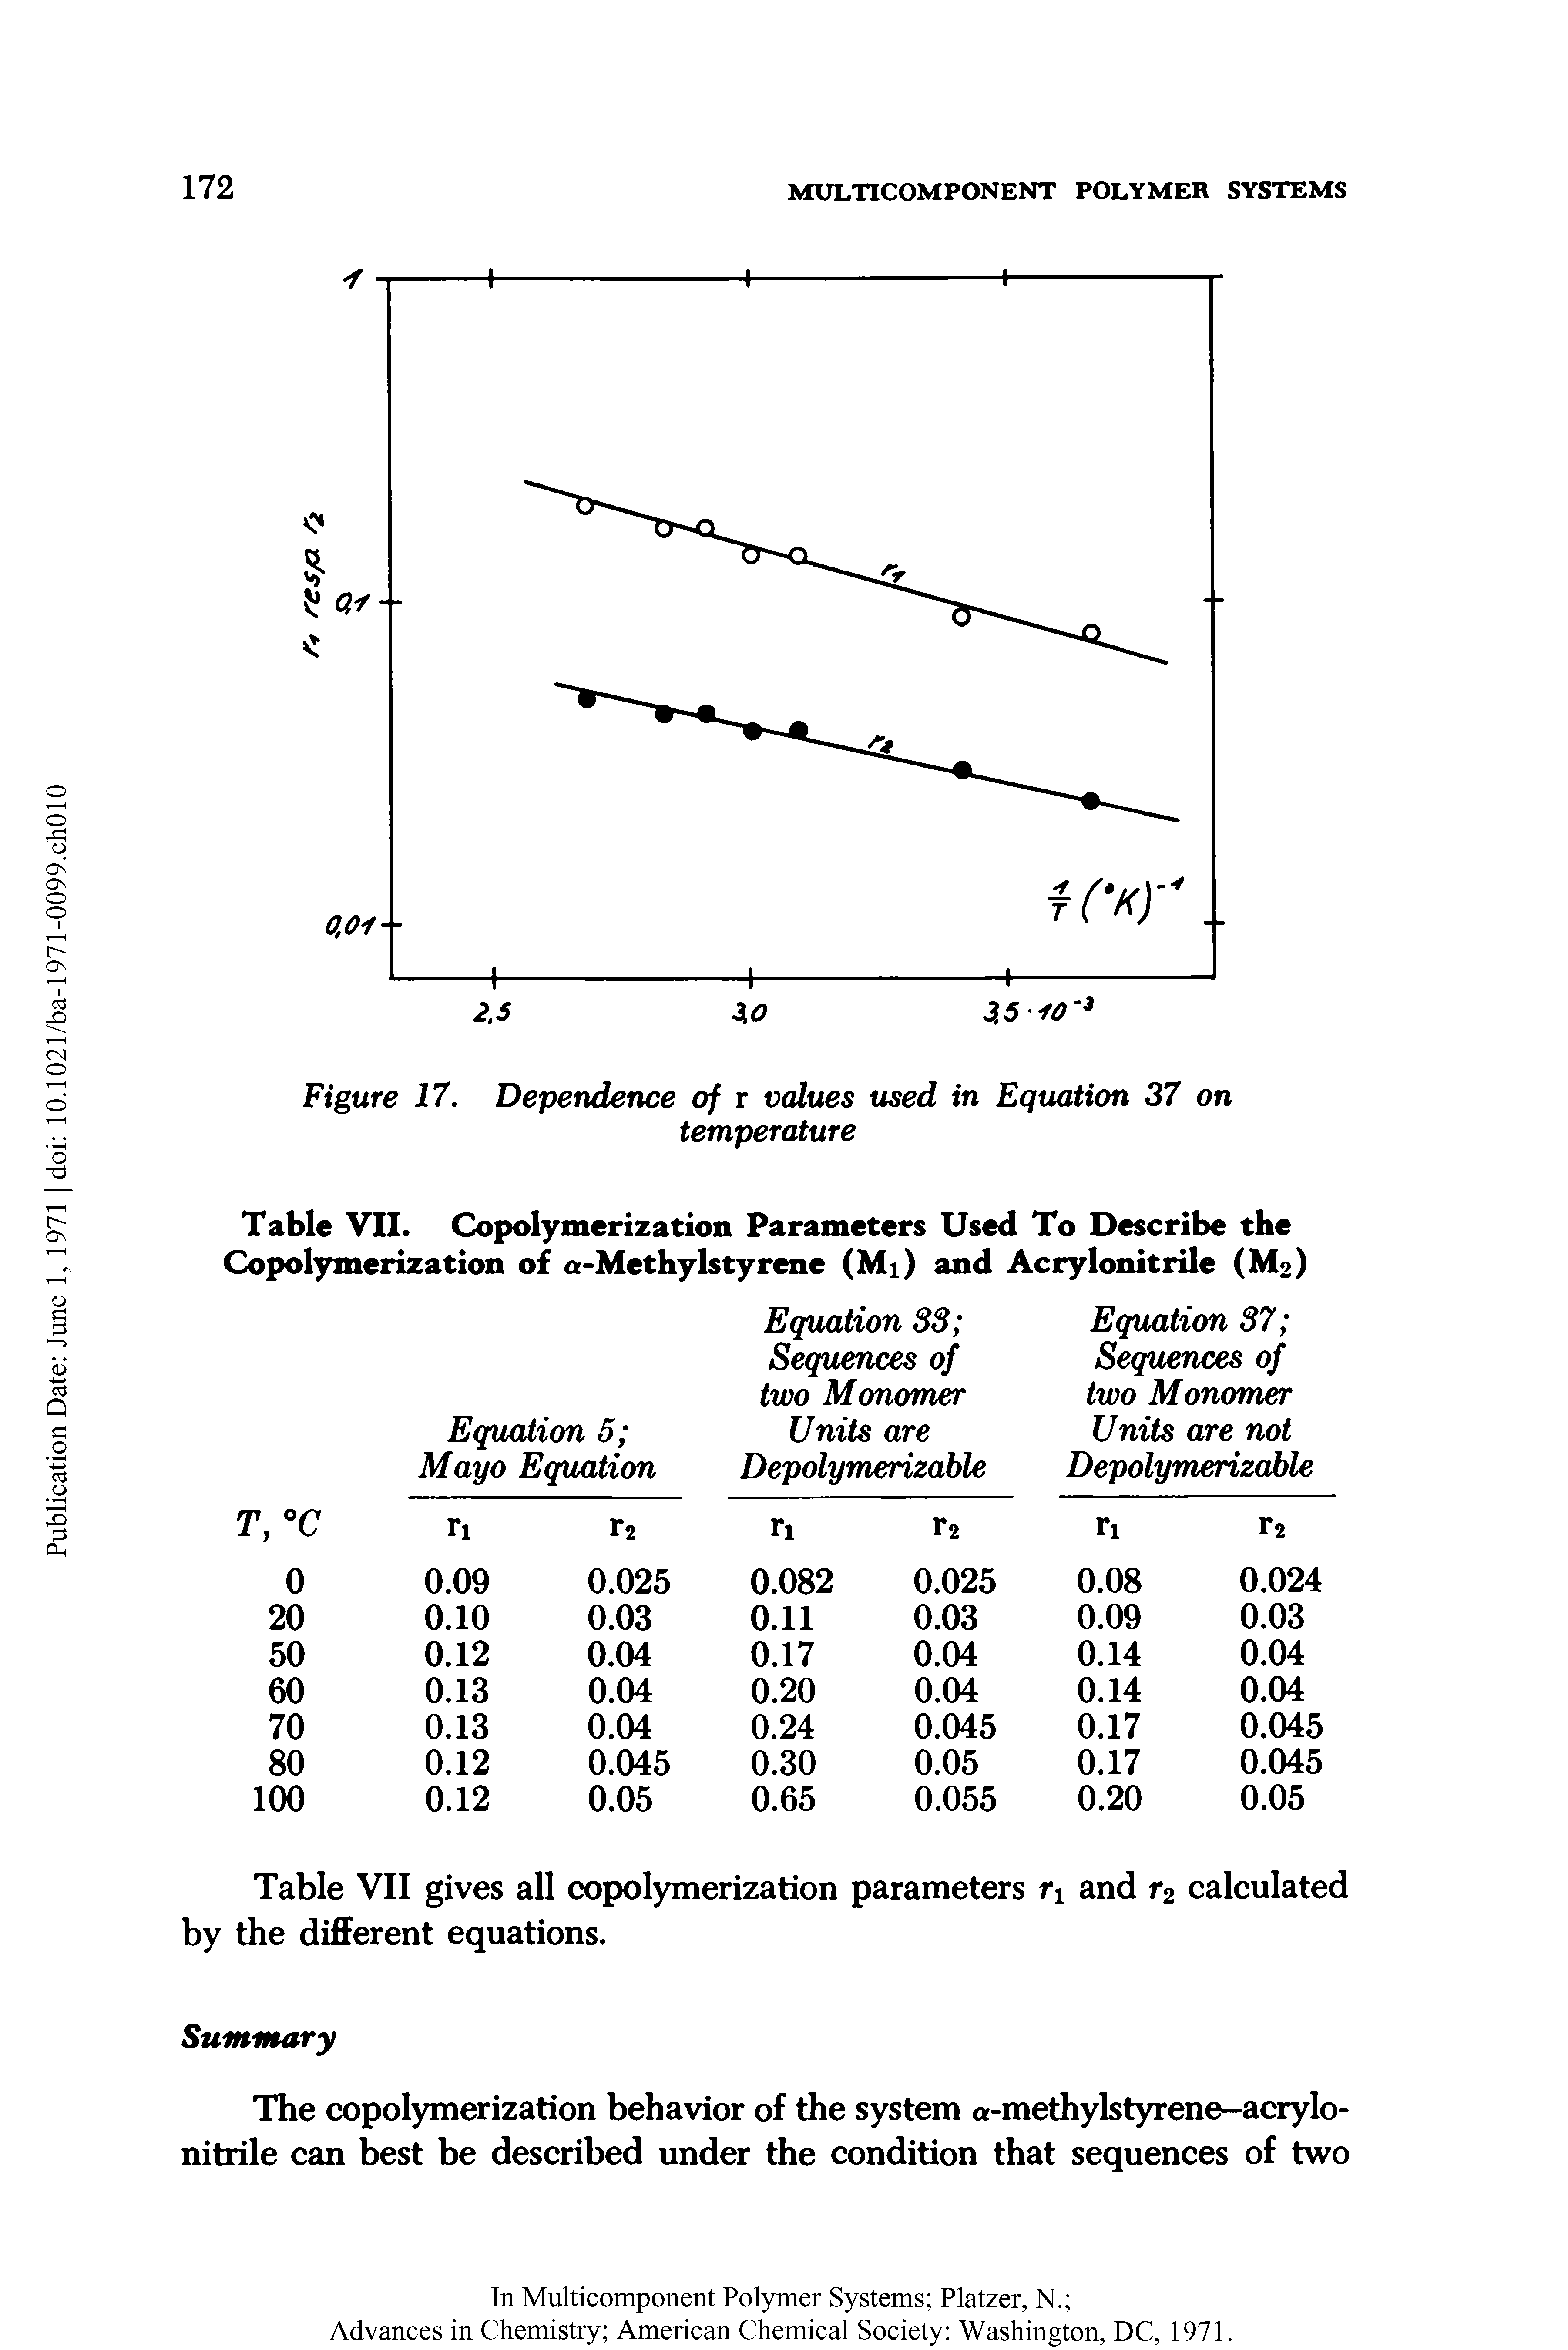 Table VII gives all copolymerization parameters ri and r2 calculated by the different equations.